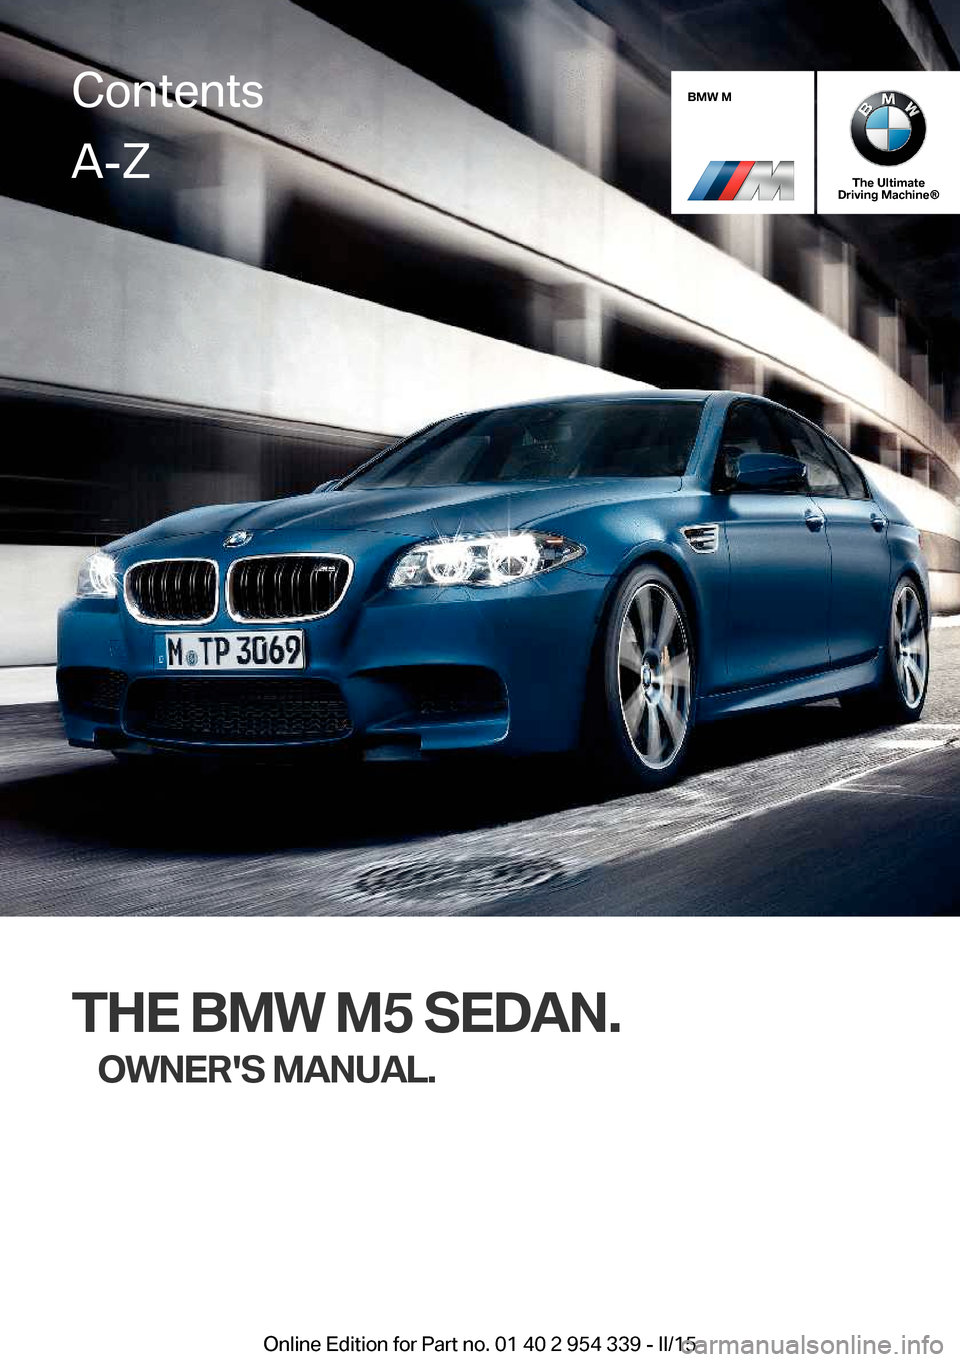 BMW M5 2015 F10M Owners Manual BMW M
The Ultimate
Driving Machine®
THE BMW M5 SEDAN.
OWNERS MANUAL.
ContentsA-Z
Online Edition for Part no. 01 40 2 954 339 - II/15   